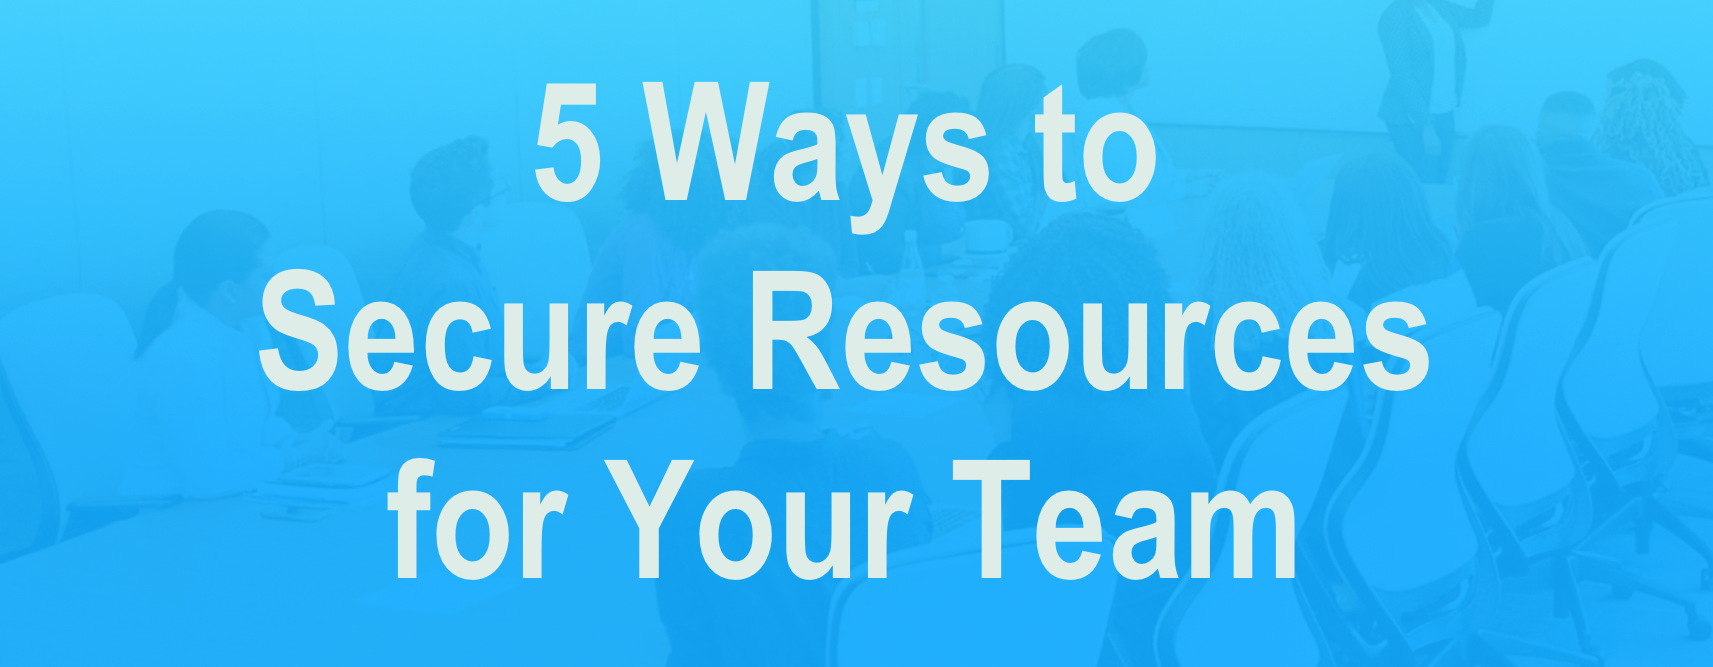 Secure Resources for Your Team